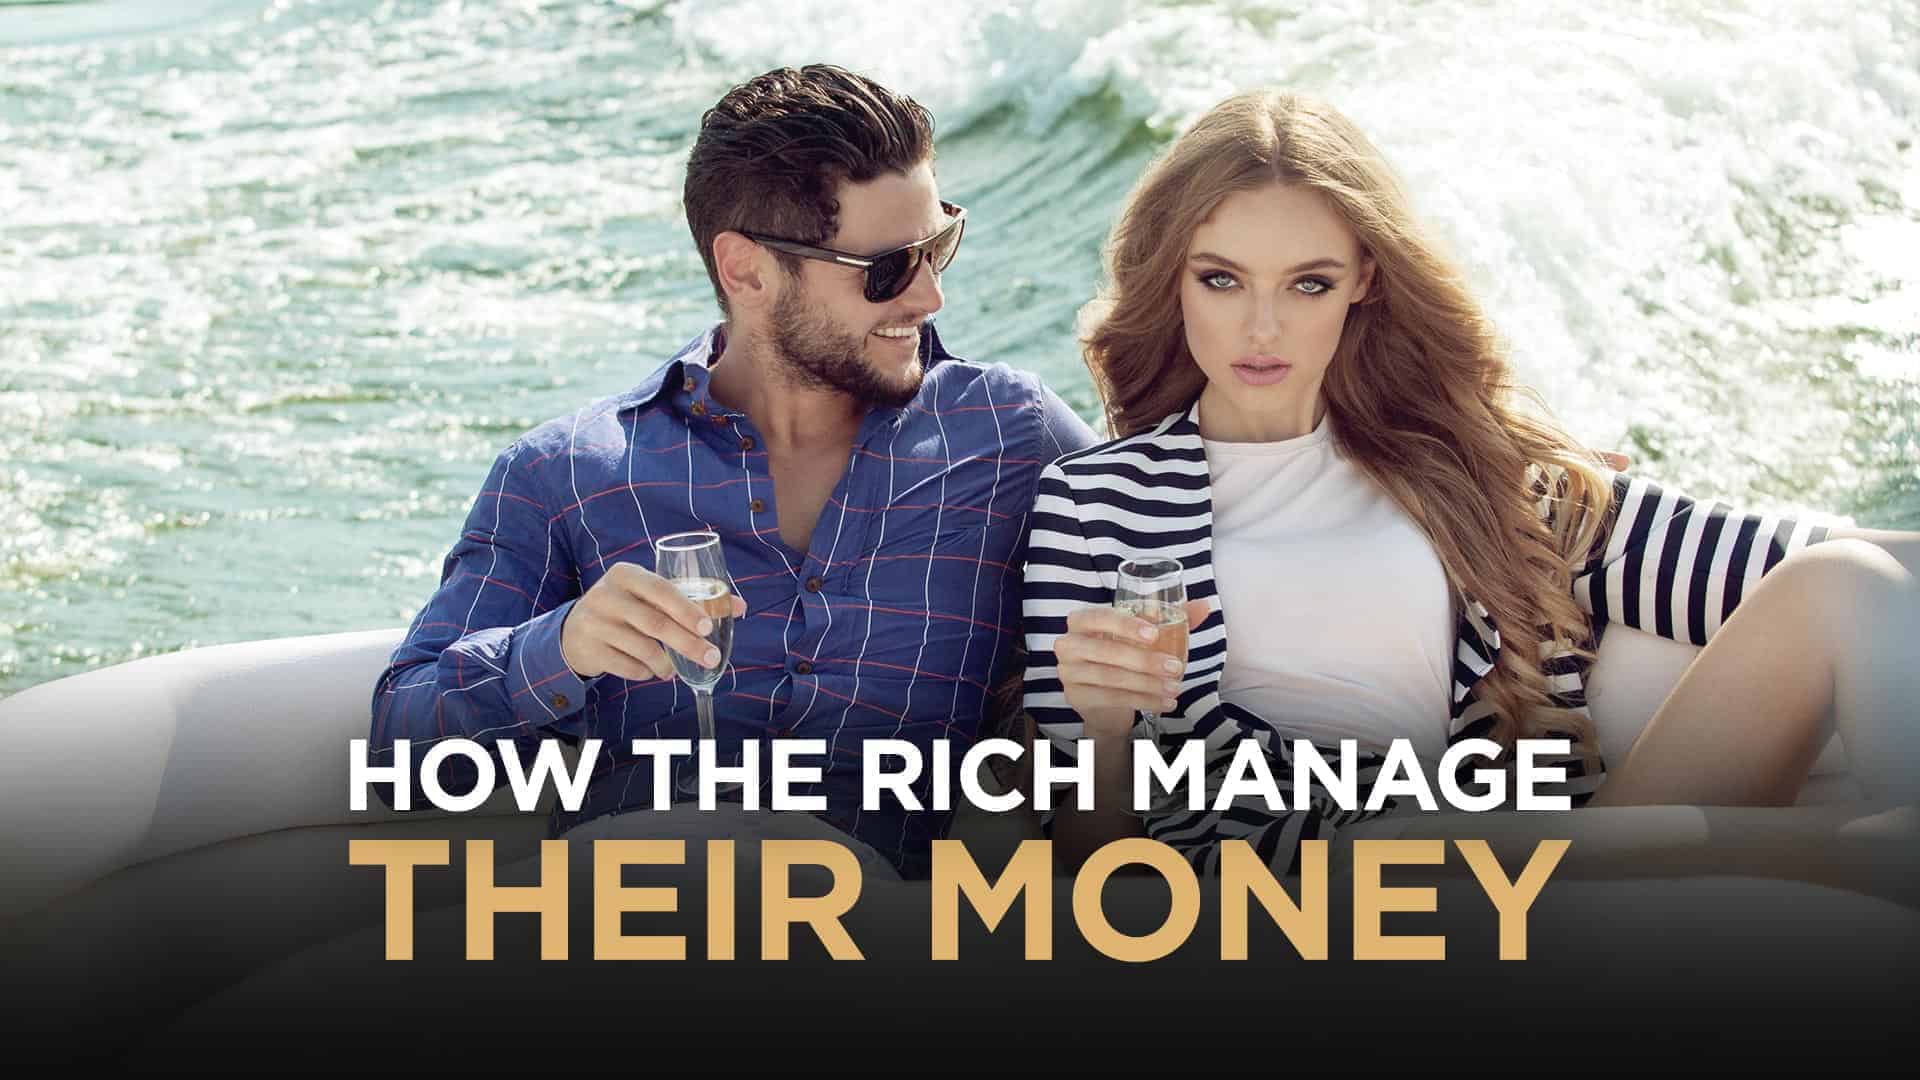 How To Deal With Gold Diggers, Transactional Relationships and Genuine  Friendships When You're Wealthy - Dan Lok